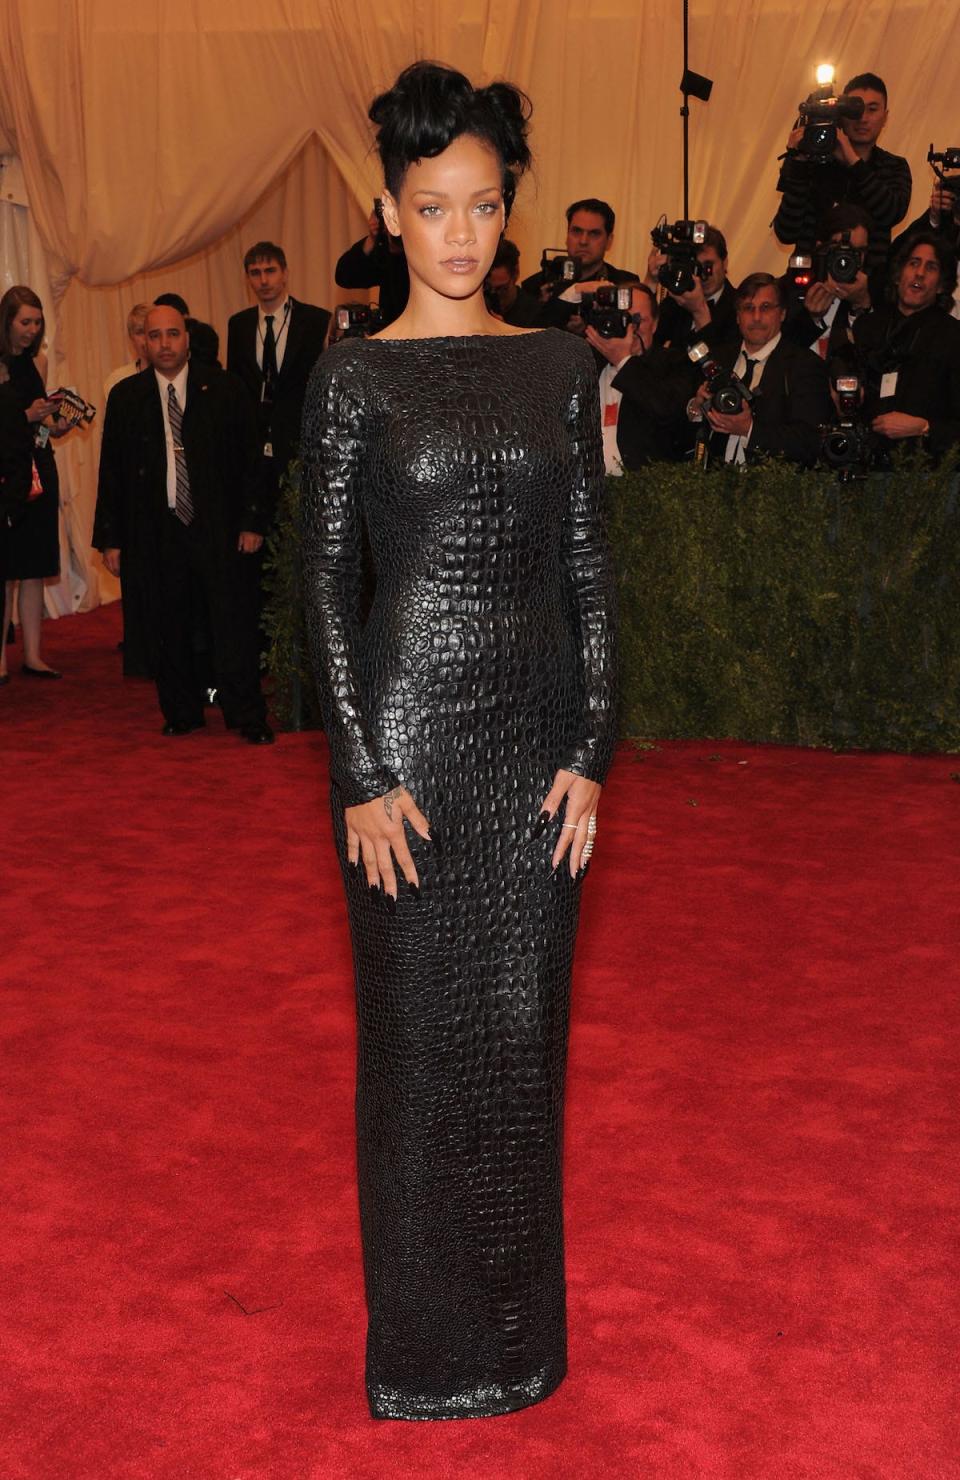 Rihanna wore a black dress to the 2012 Met Gala that appeared to be alligator skinned.